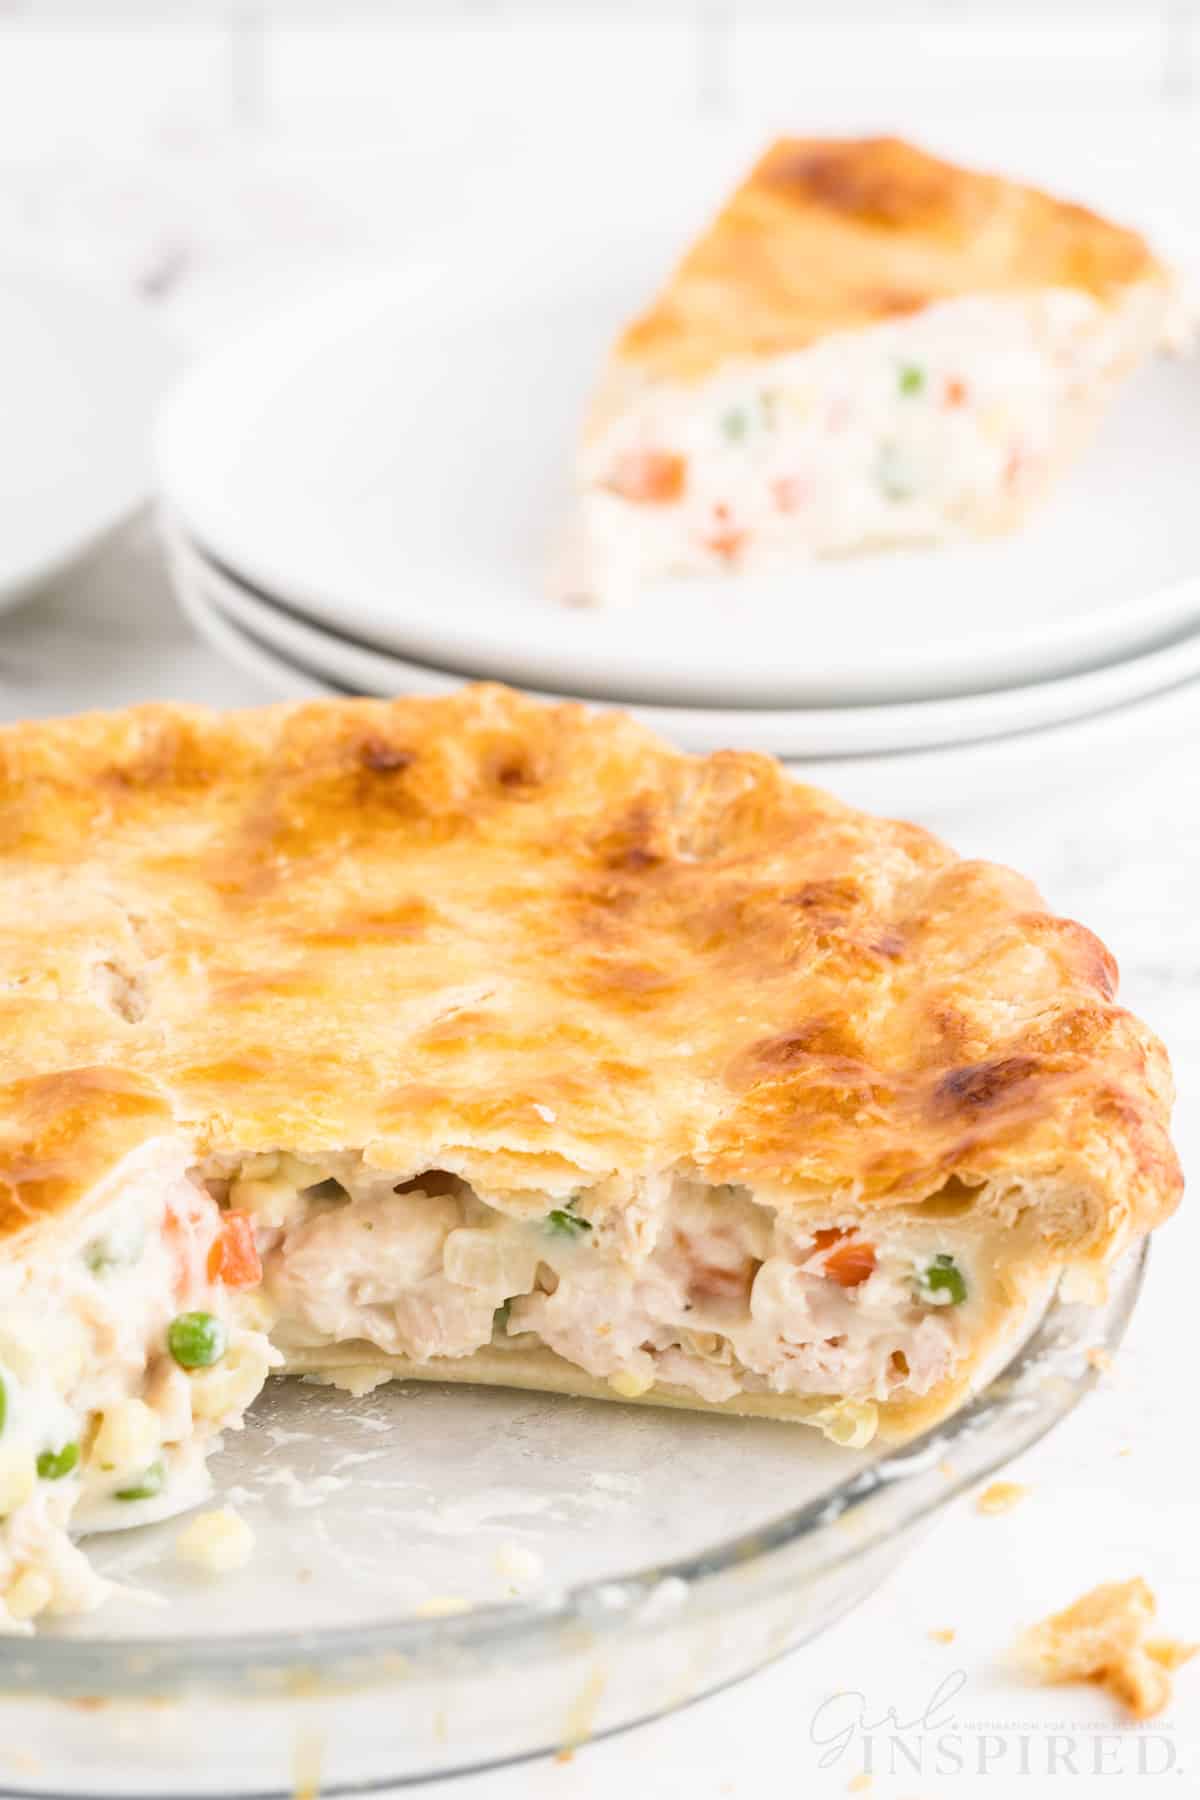 Easy chicken pot pie with slices removed and a piece of pie on white plates.